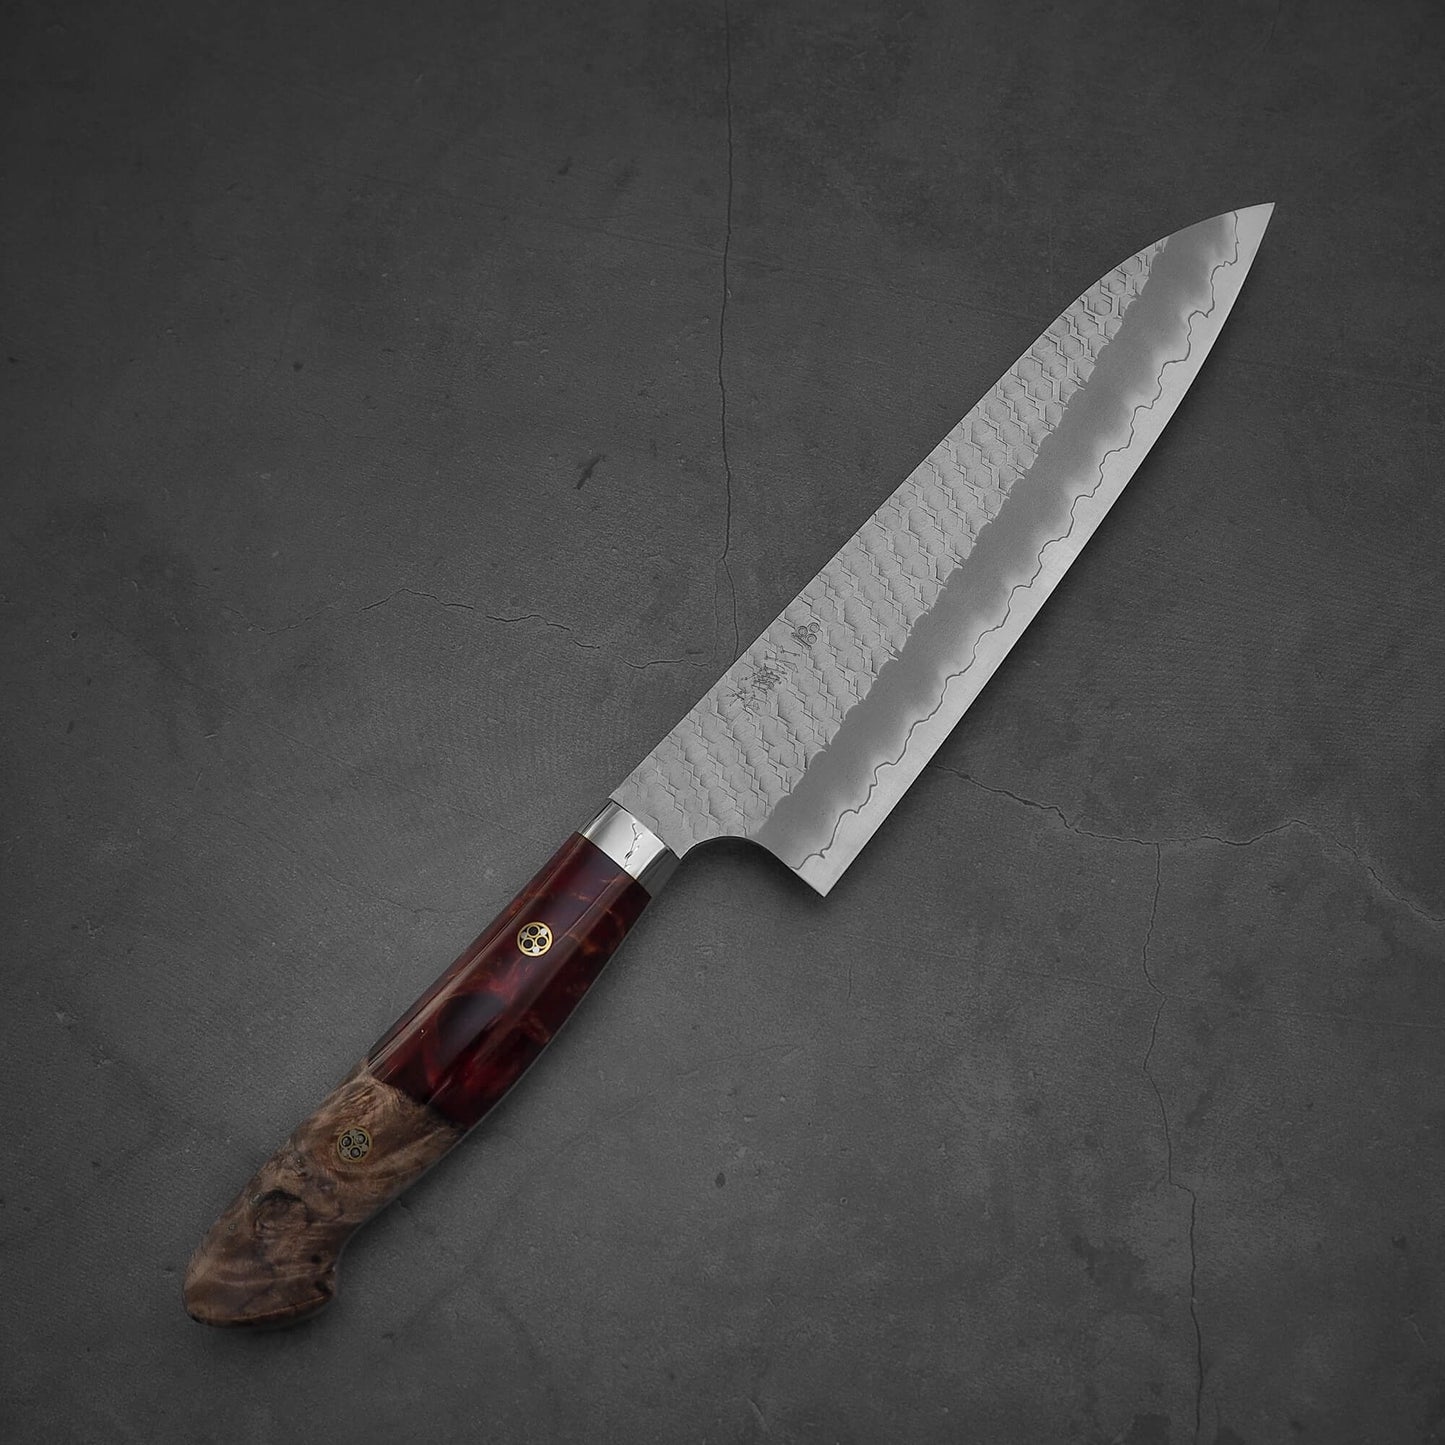 Top view of 210mm Nigara tsuchime SG2 gyuto knife with red handle